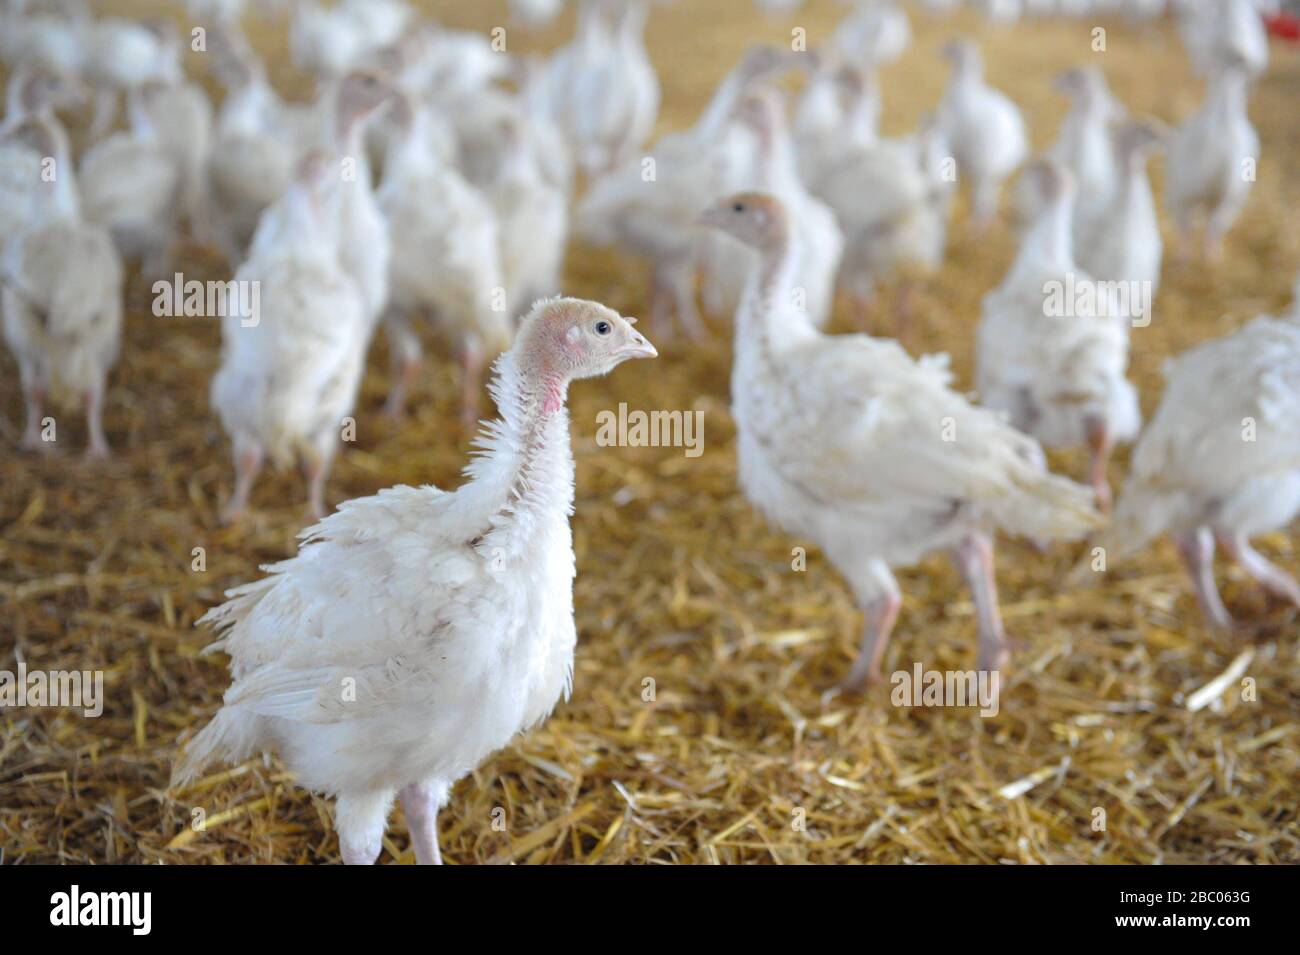 Ludwig Hartmann, parliamentary party leader of the Greens, at the invitation of the Farmers' Association, visits a turkey fattening farm in the district of Aichach-Friedberg in Swabia. [automated translation] Stock Photo